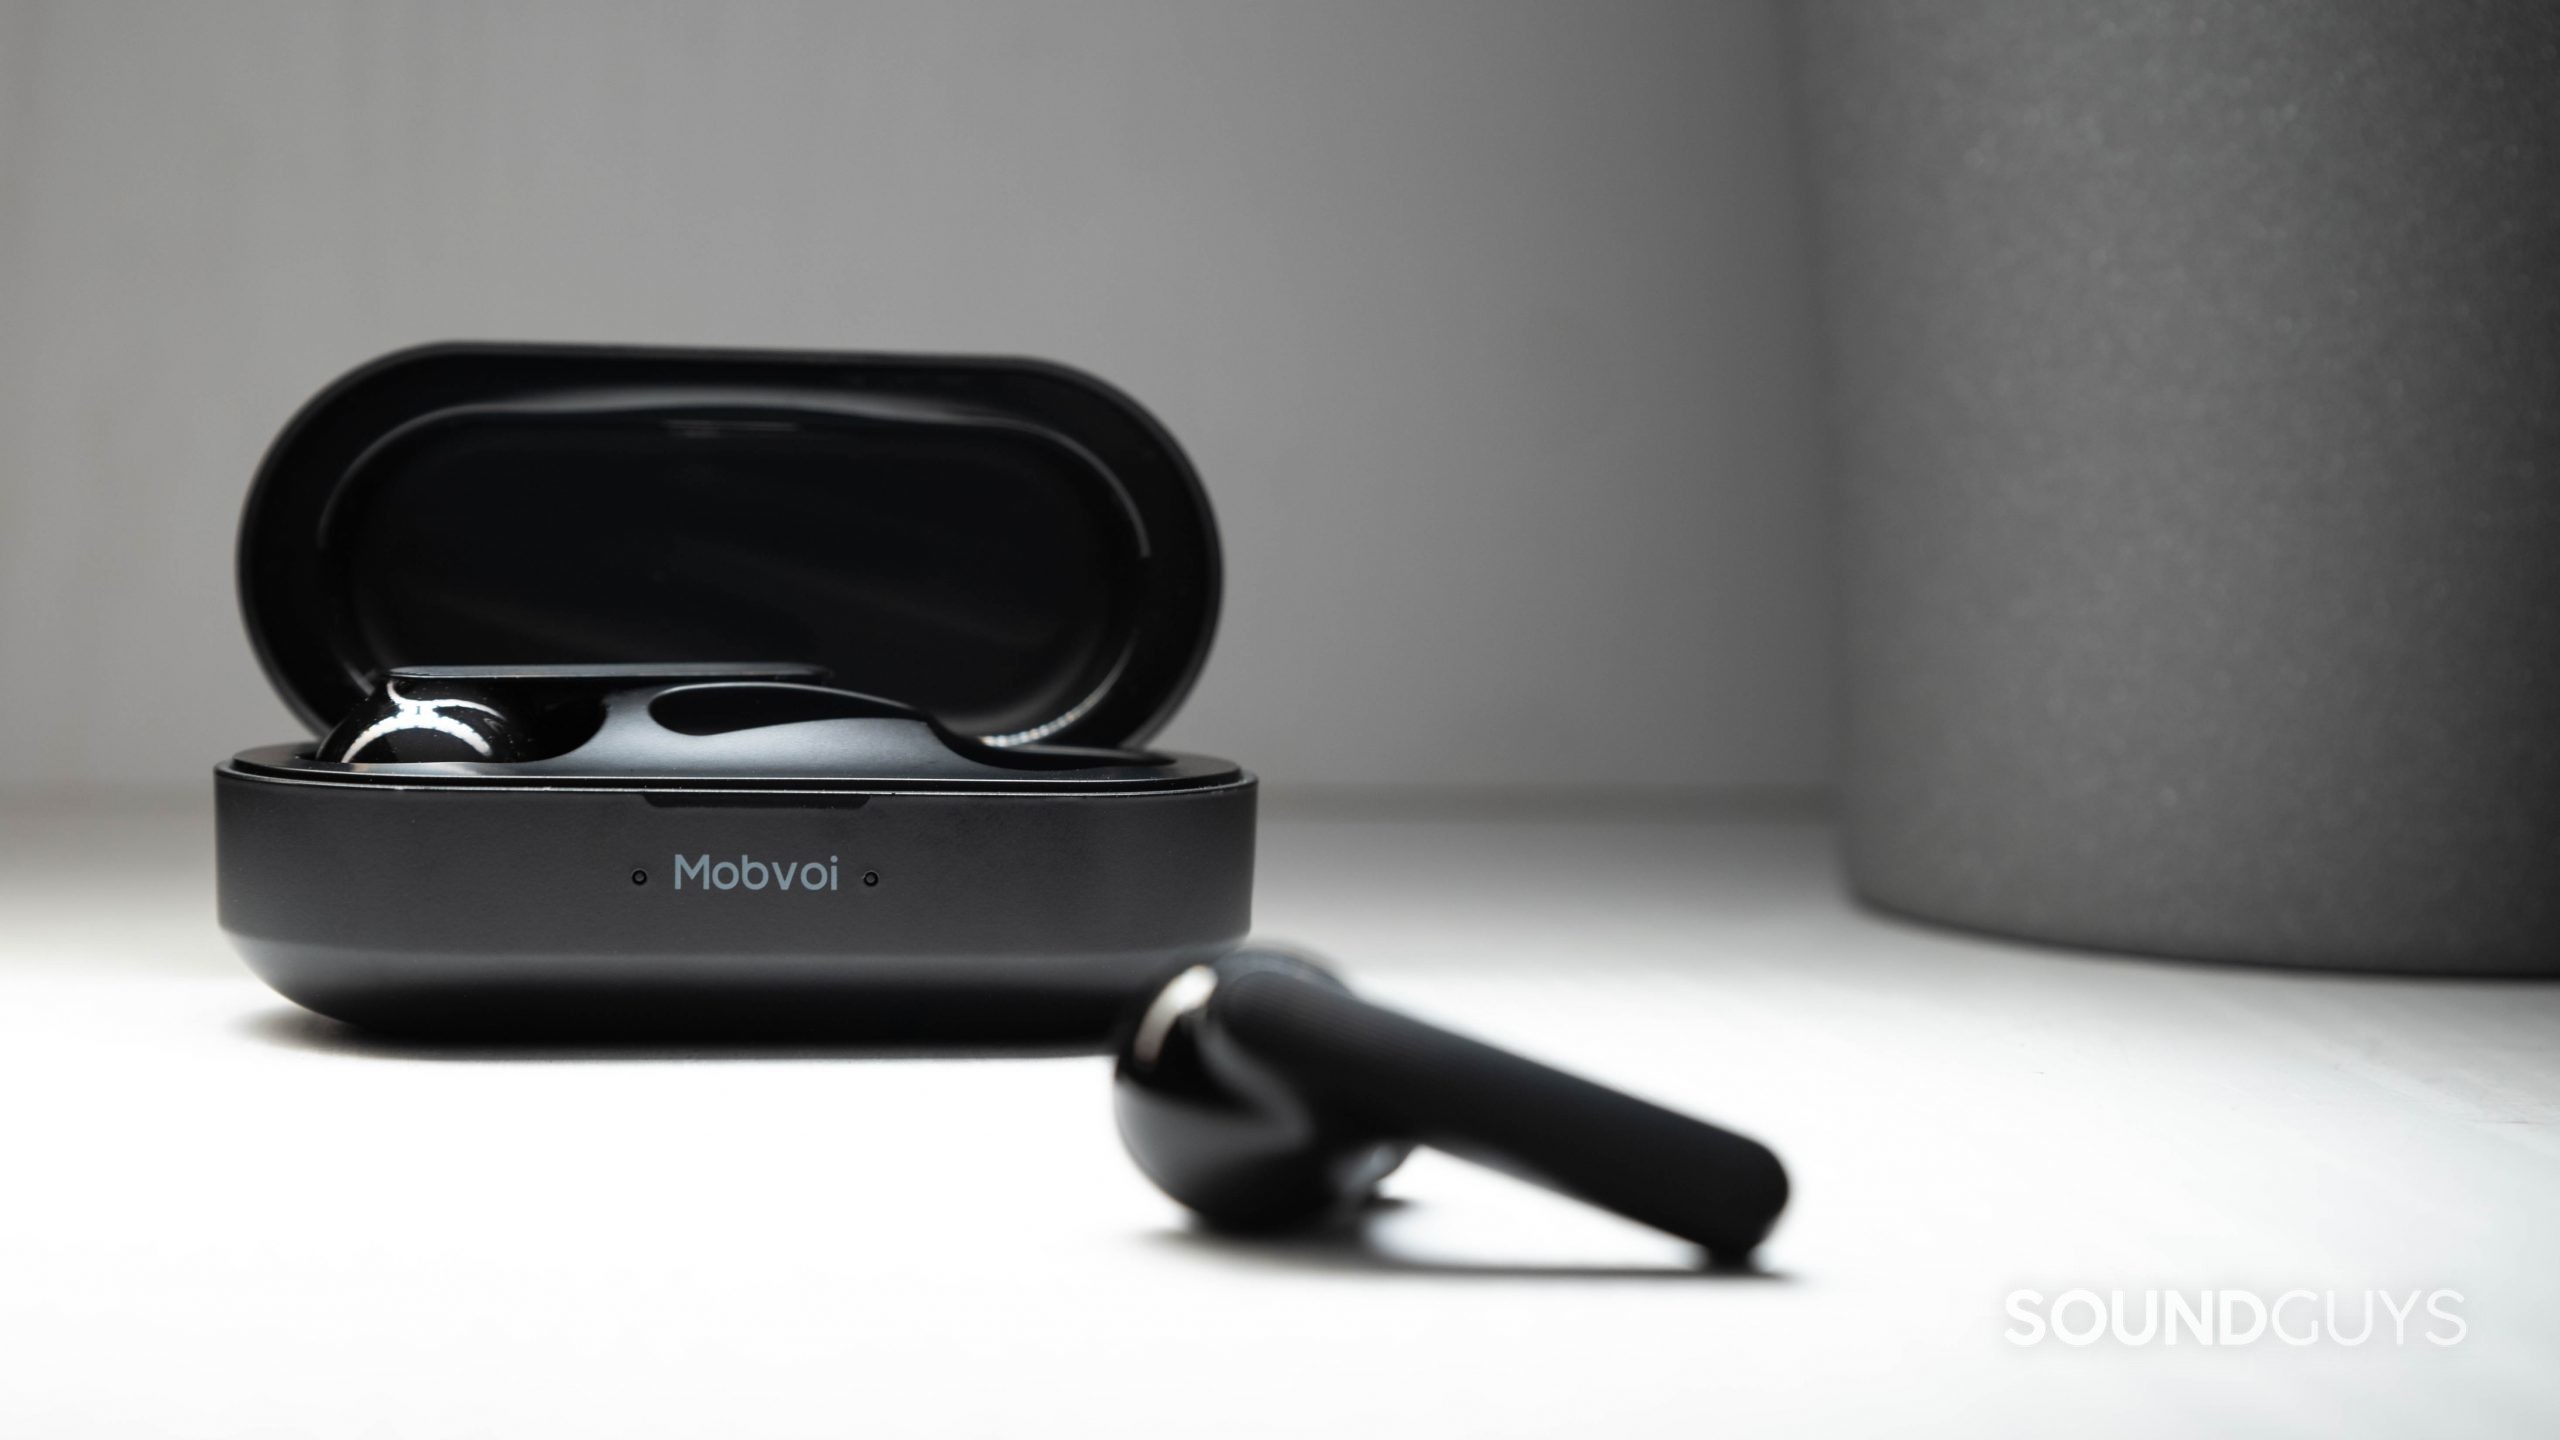 The Mobvoi Earbuds Gesture true wireless earbuds in black, with one earbud outside of the open case and the other inside of it.